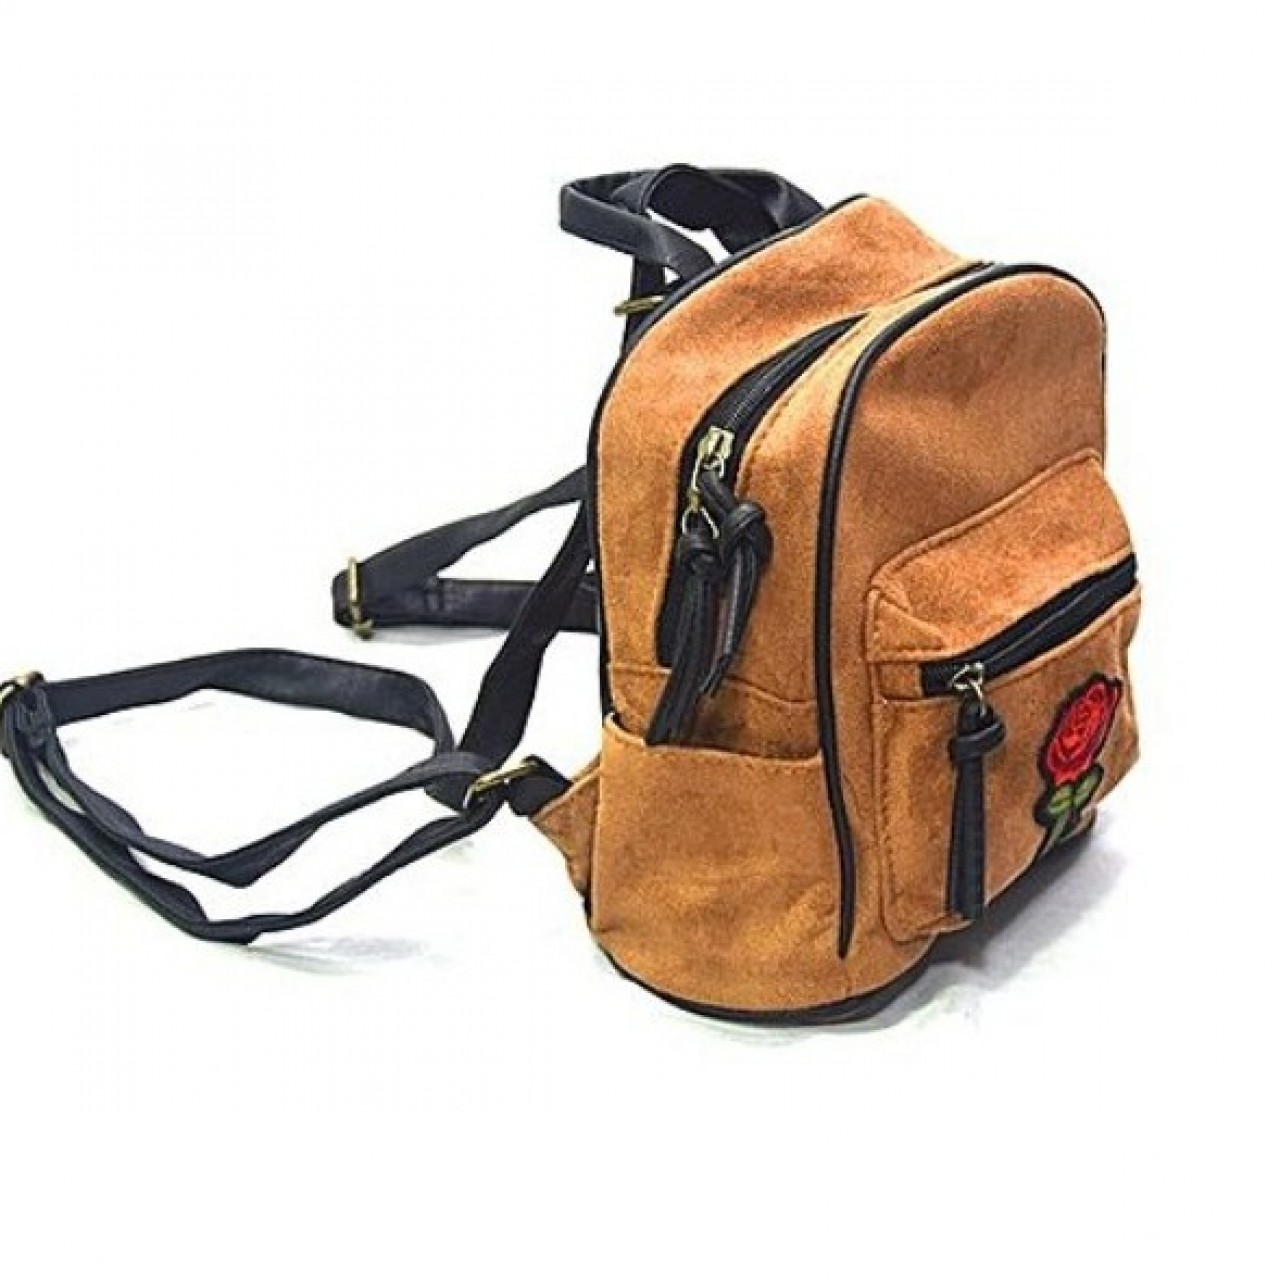 Suede Fabric Bag For School & College - Brown